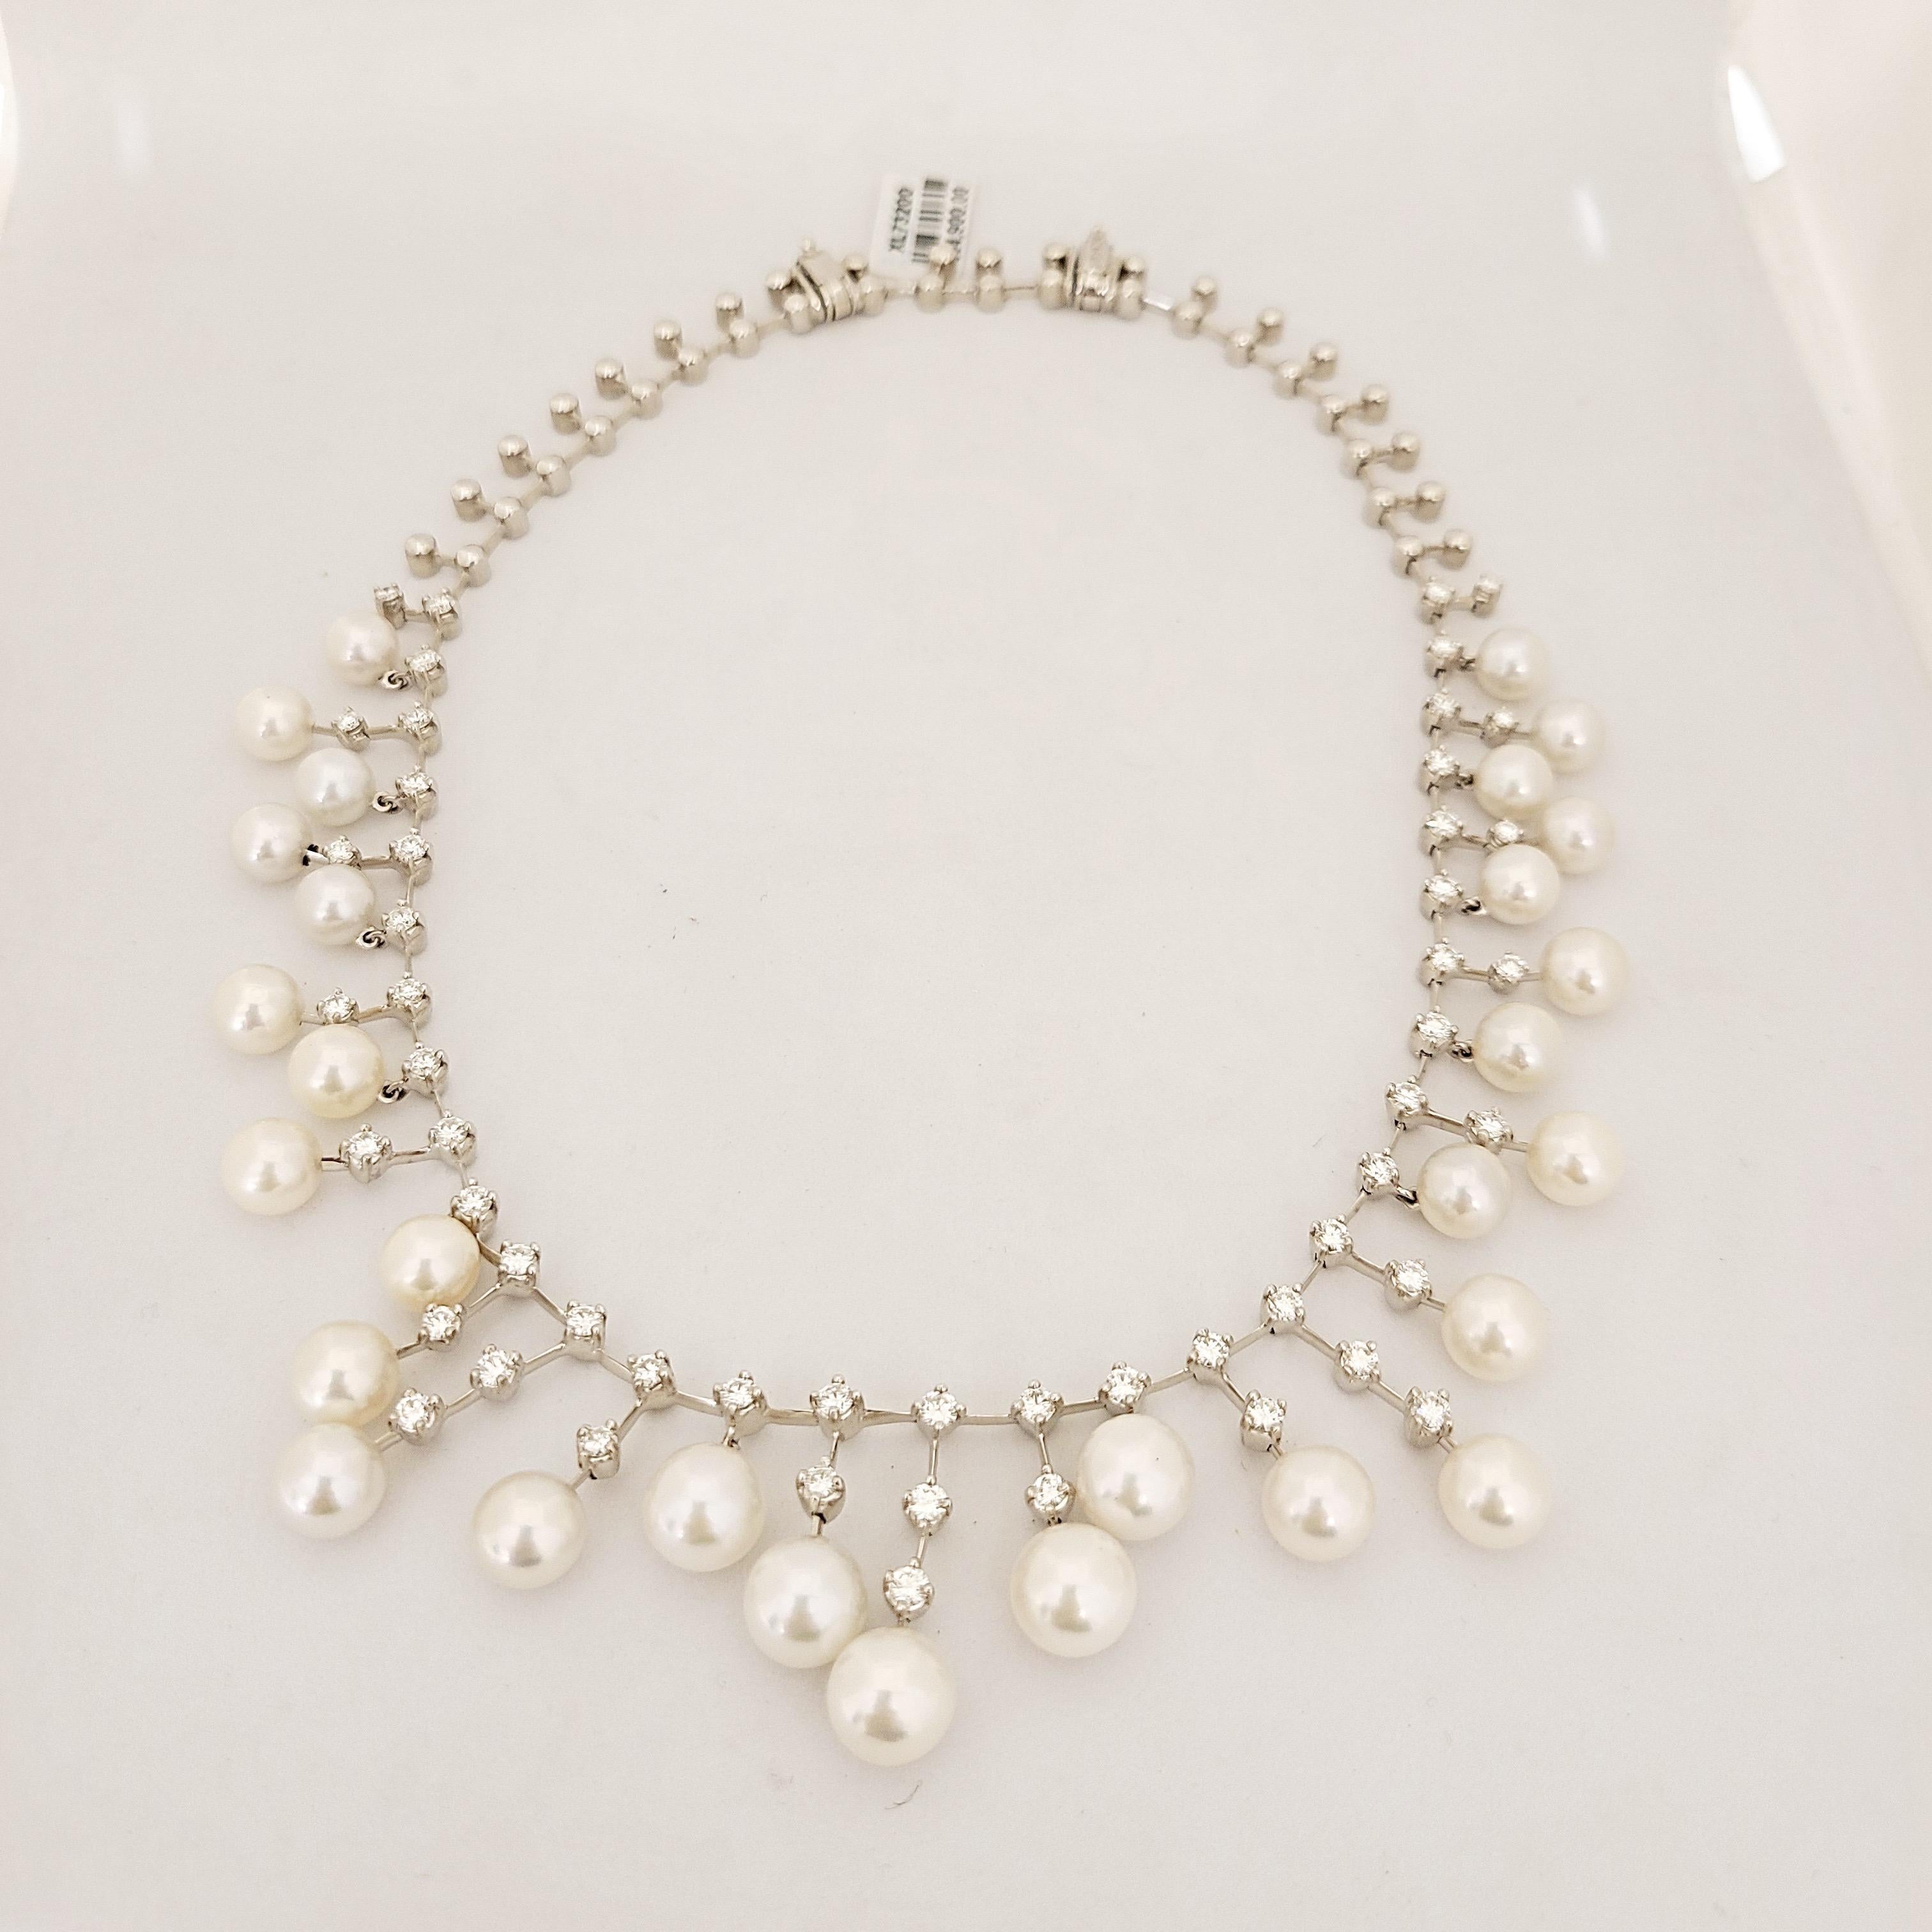 A beautifully designed showstopping 18 karat white gold necklace with floating diamonds and pearls. The necklace is set with 53 round brilliant diamond and 29 cultured pearls.  Designed with a removable section it can be worn at two different